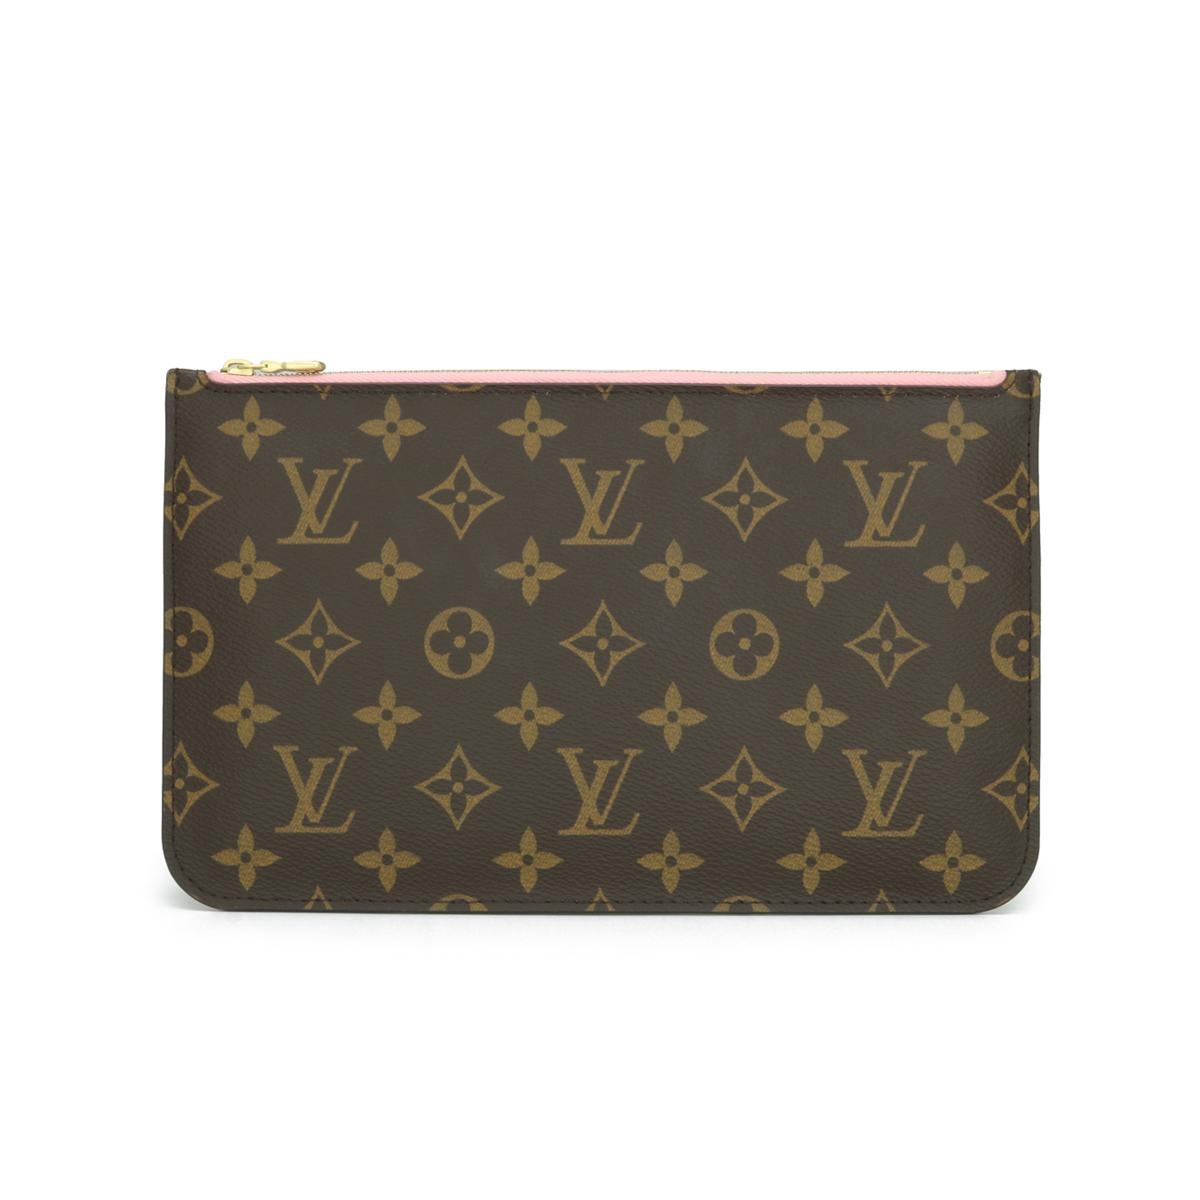 Louis Vuitton Neverfull MM Bag in Monogram Jungle Dots 2016 Limited Edition For Sale 15